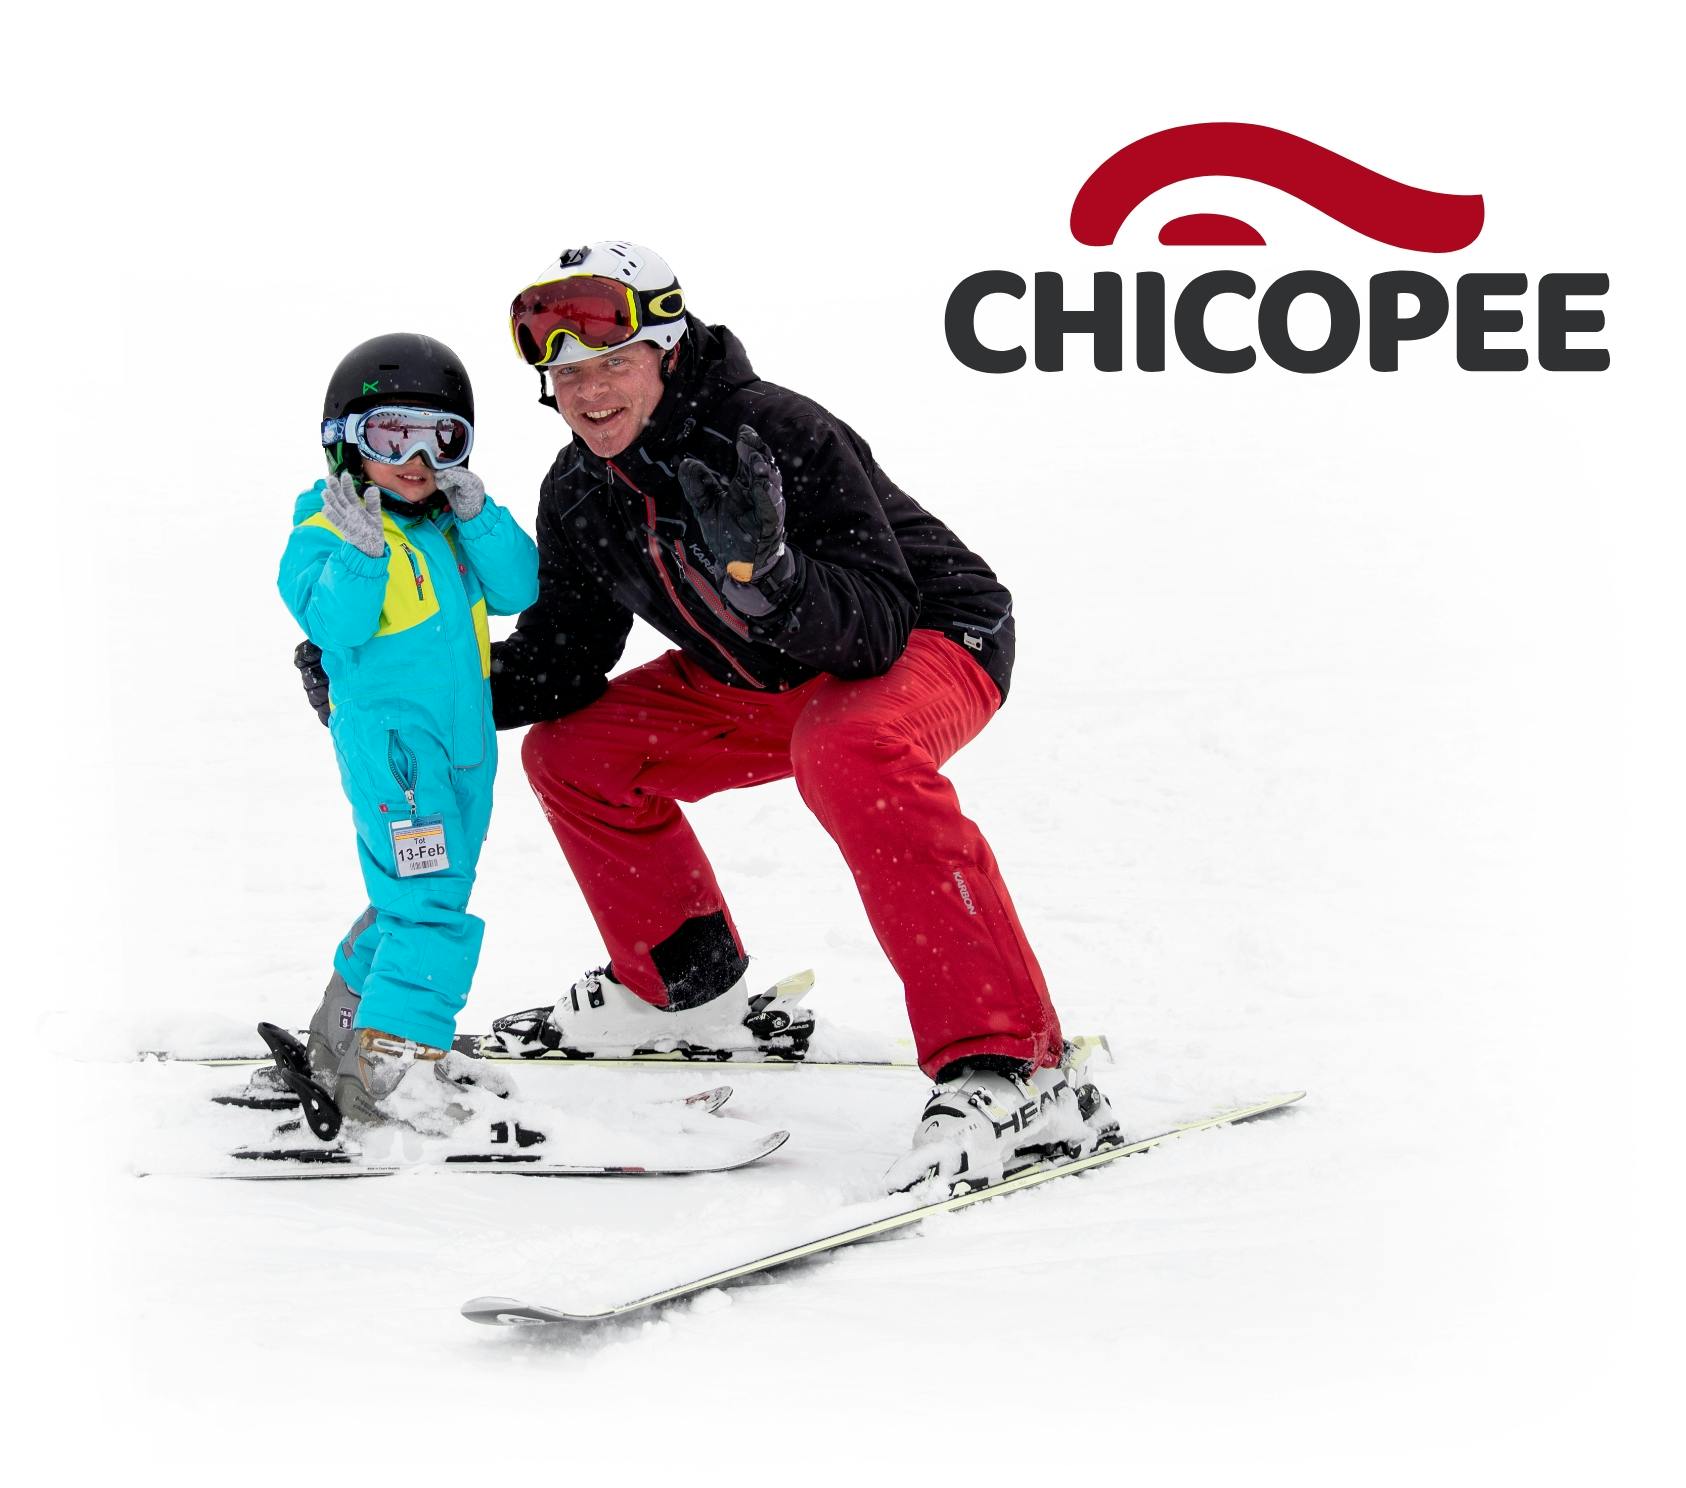 Chicopee project image showing the new logo and an image of an instructor posing with a student